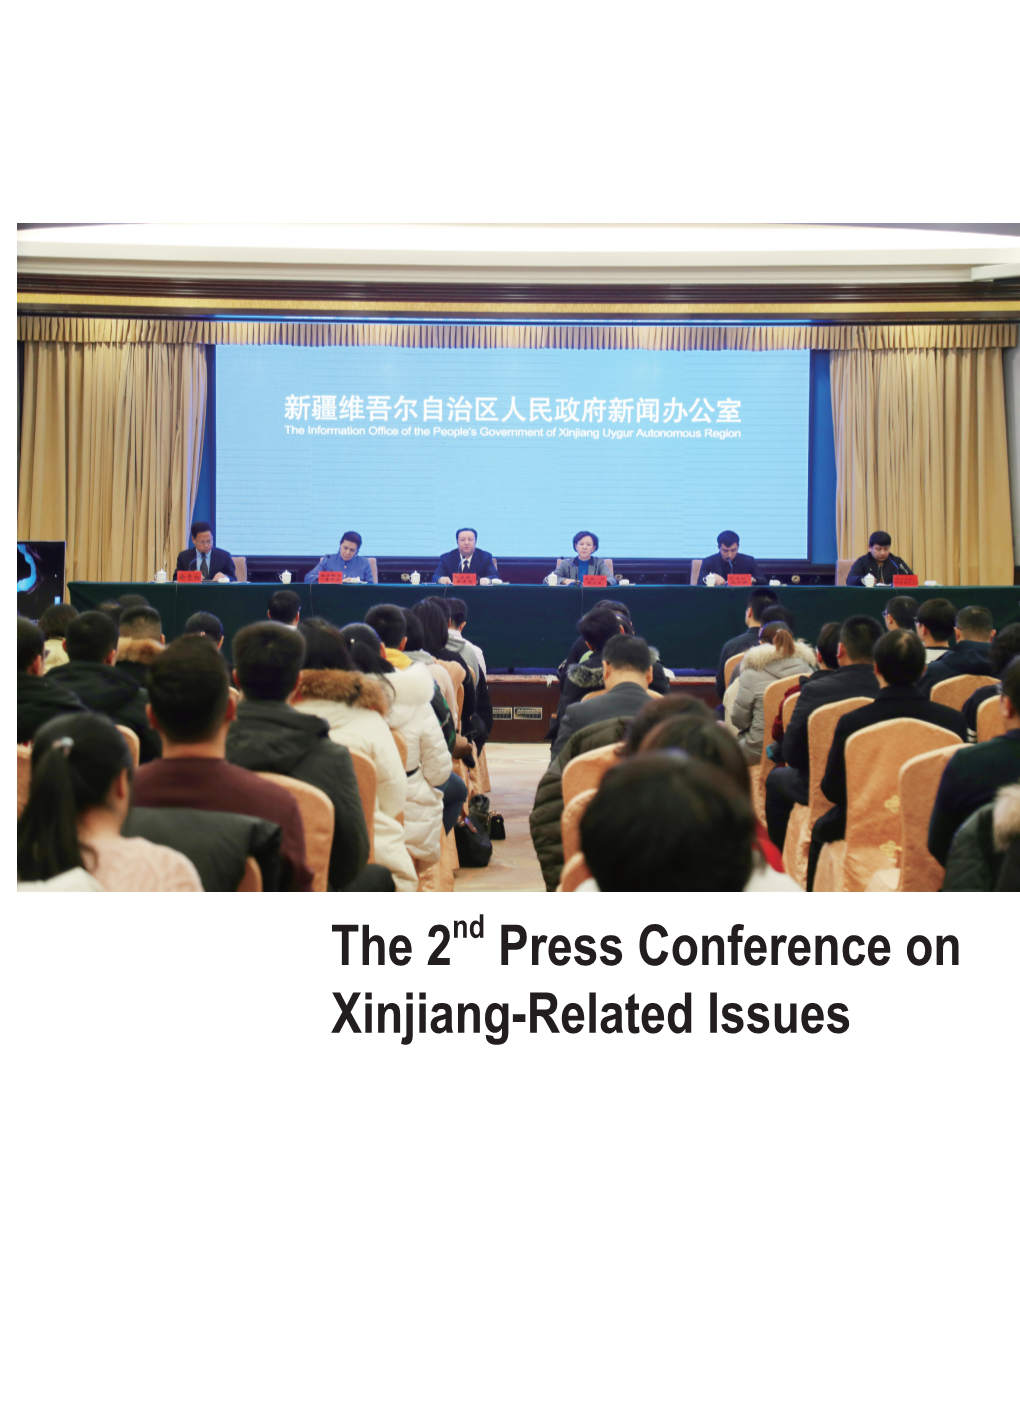 The 2Nd Press Conference on Xinjiang-Related Issues